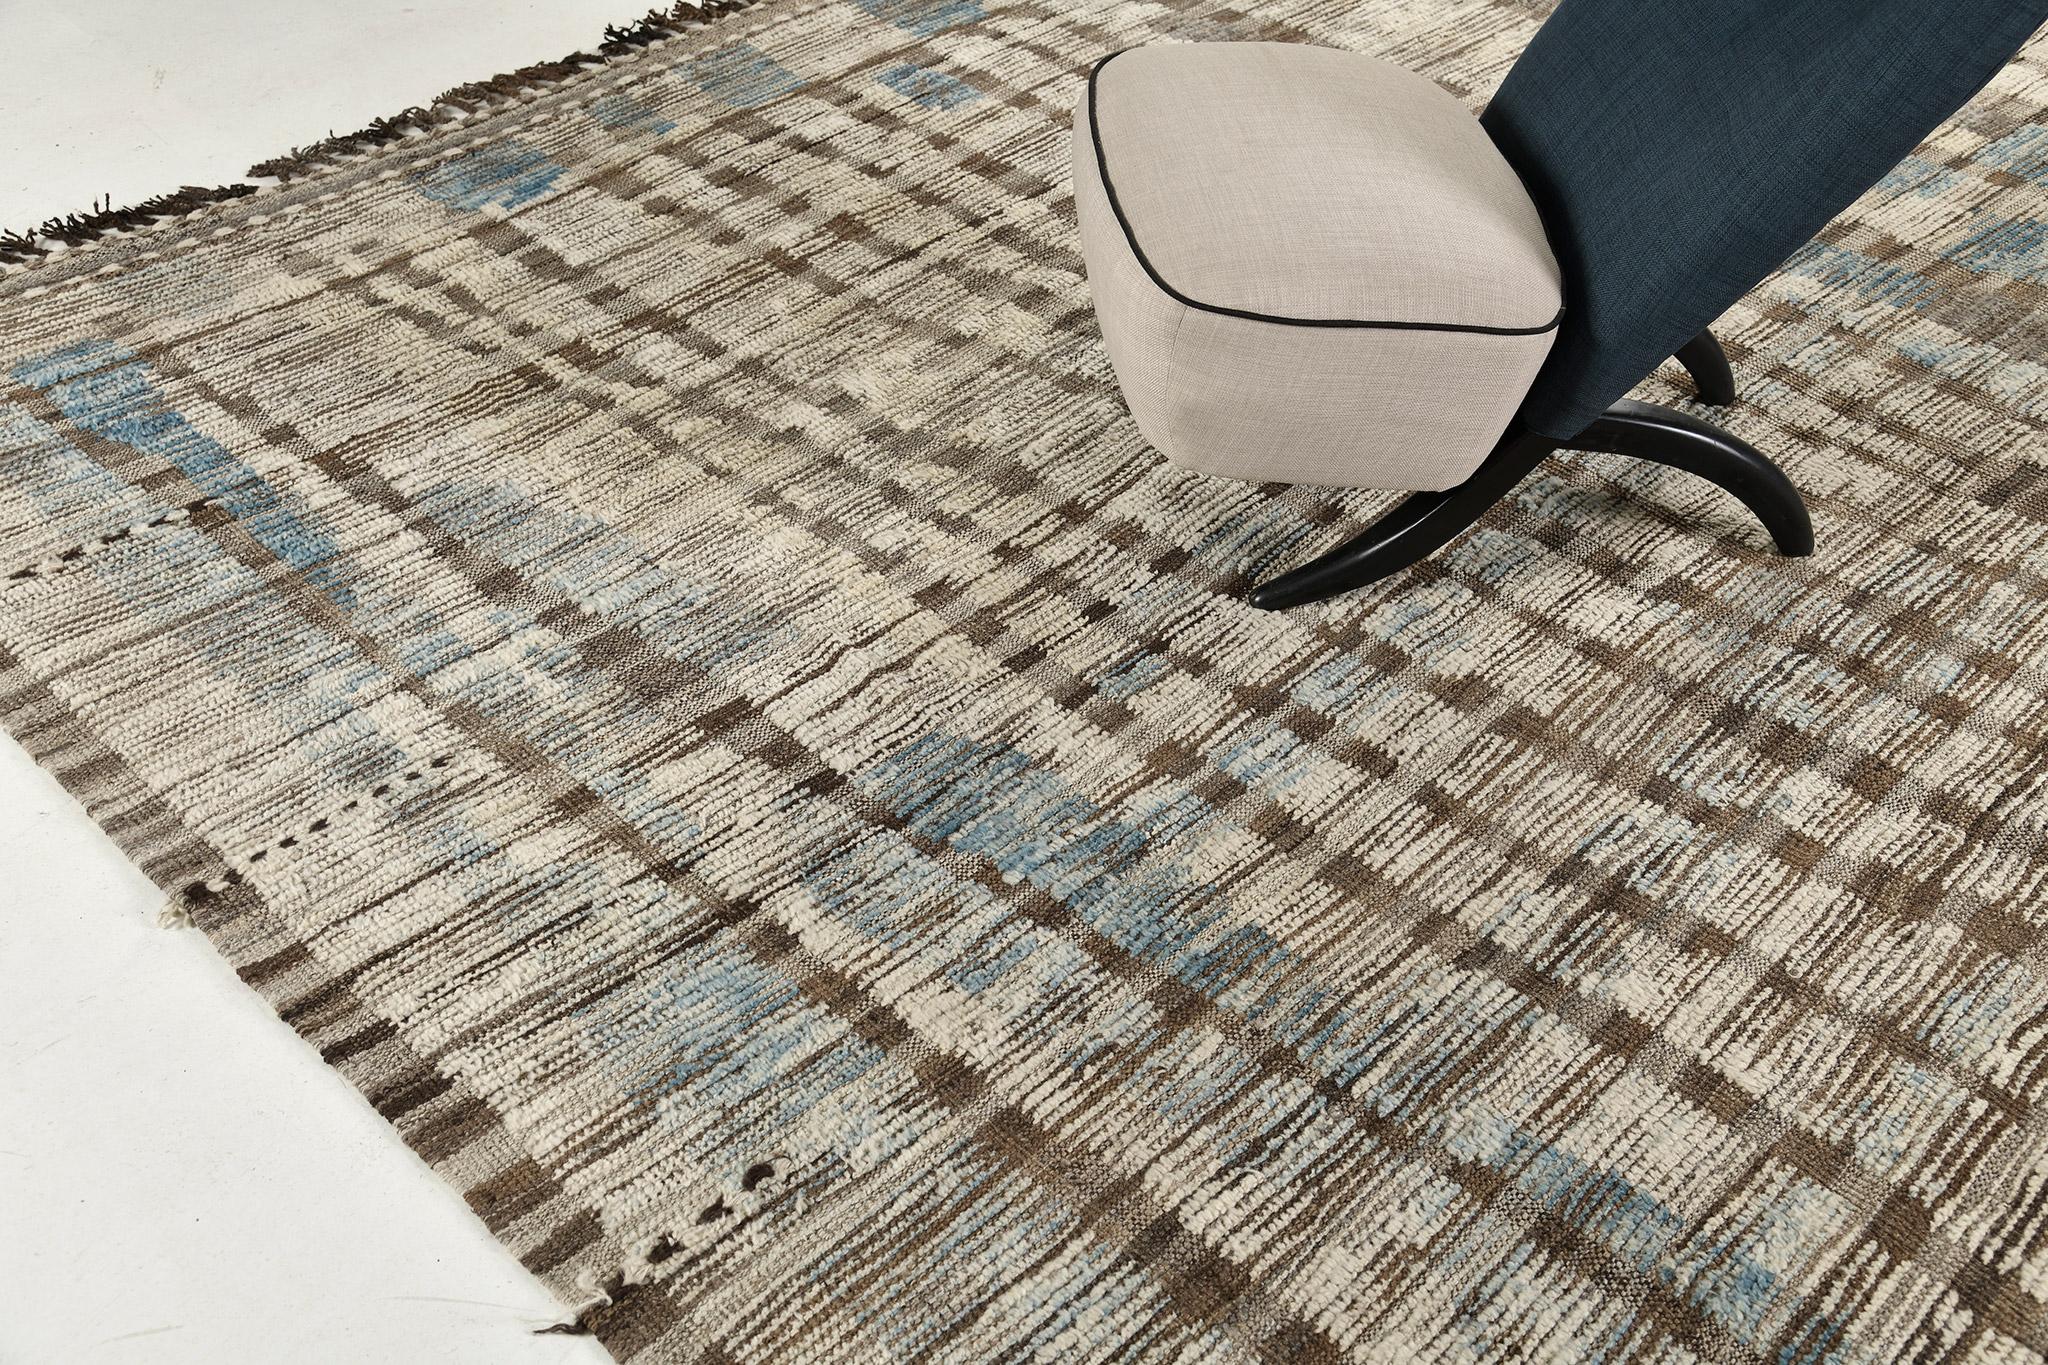 Tamarix is made of elegant wool and timeless design elements. The irregular patches of earthy-toned design and contemporary elements are what make the Atlas Collection so unique and sought after. Mehraban's Atlas collection is noted for its